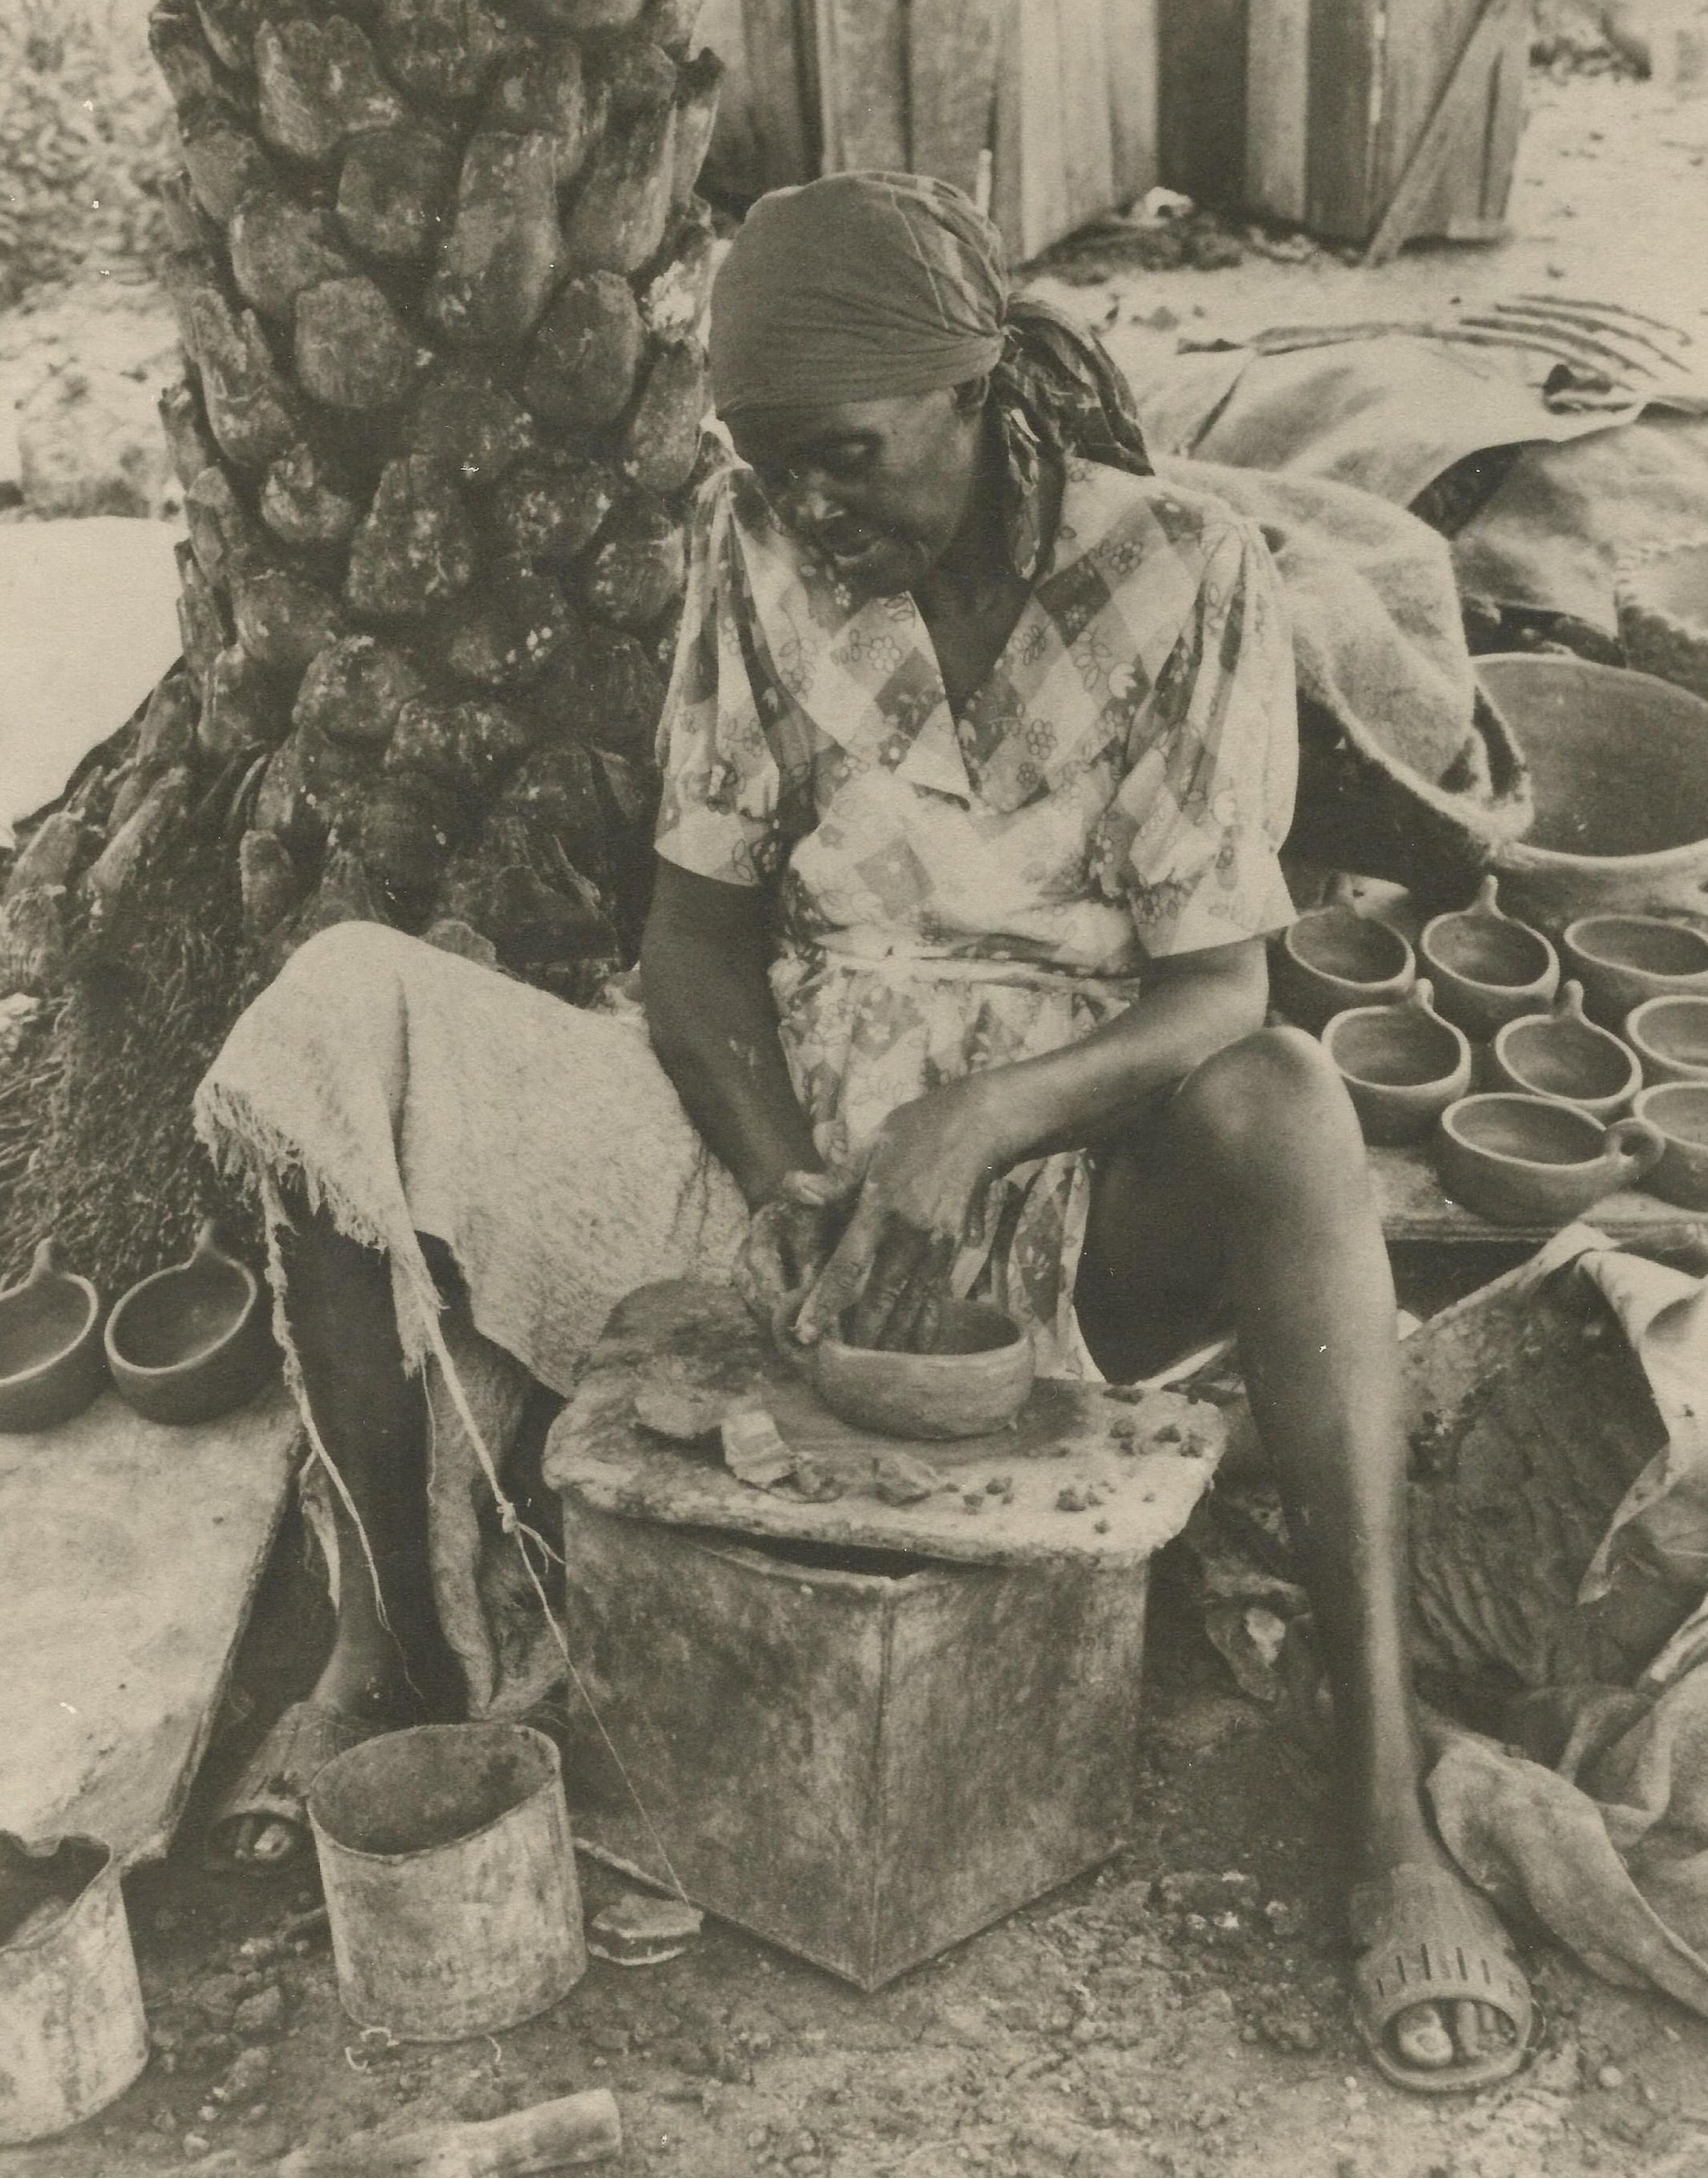 Historical photo from the National Museum of Antigua and Barbuda of a woman making traditional pottery